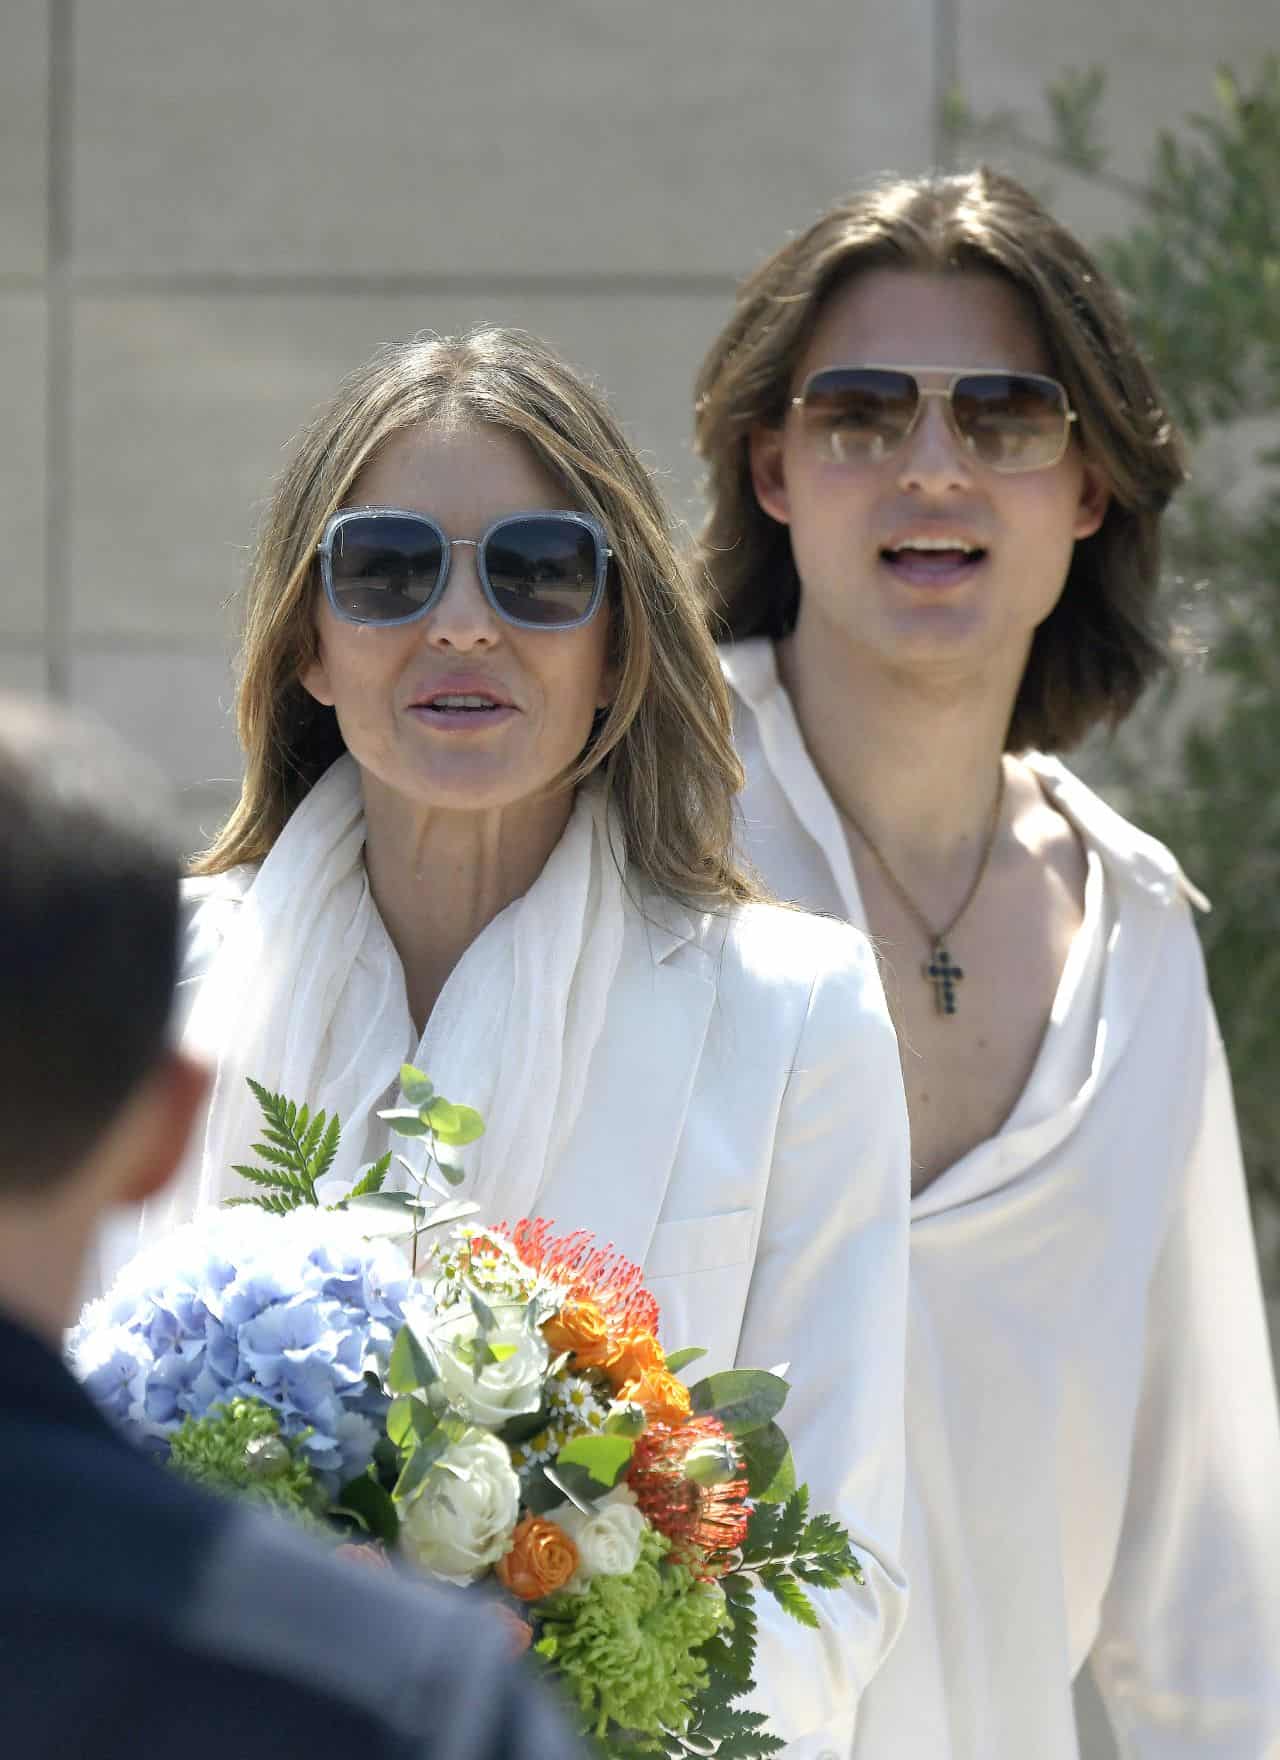 Elizabeth Hurley and Son Damian Look Stylish in Matching White Outfits